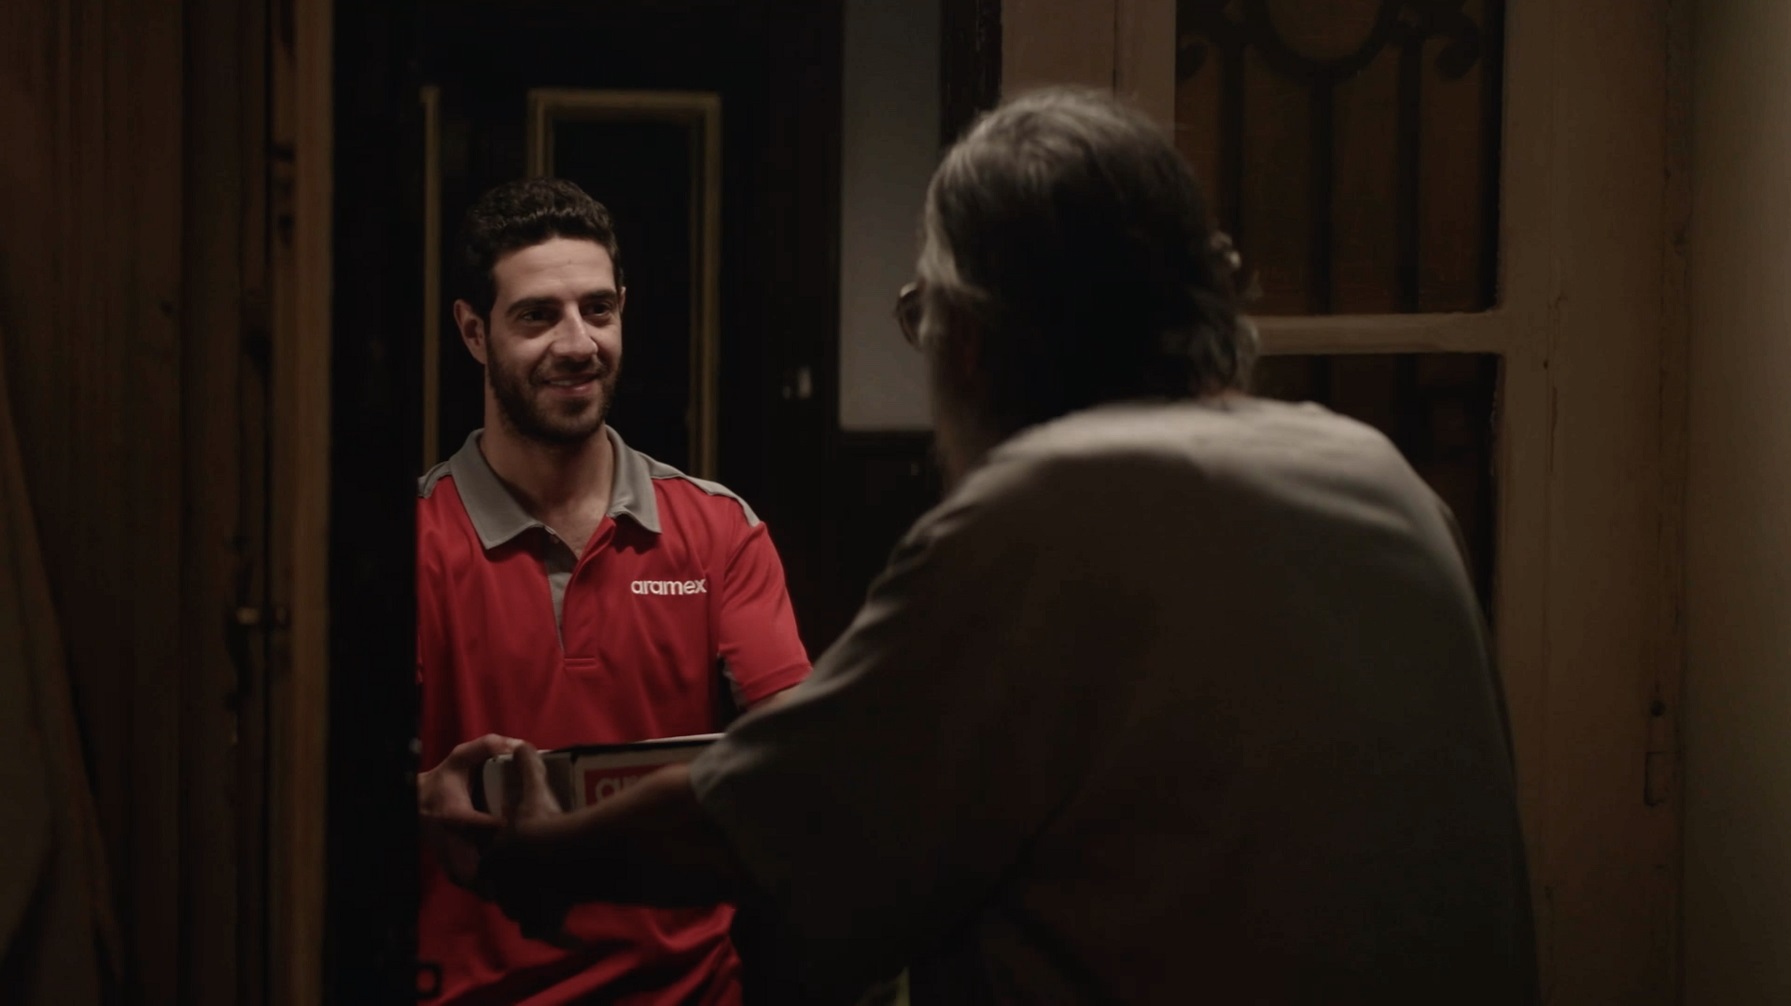 Aramex’s Ramadan Ad Shows the Human Side of its Couriers